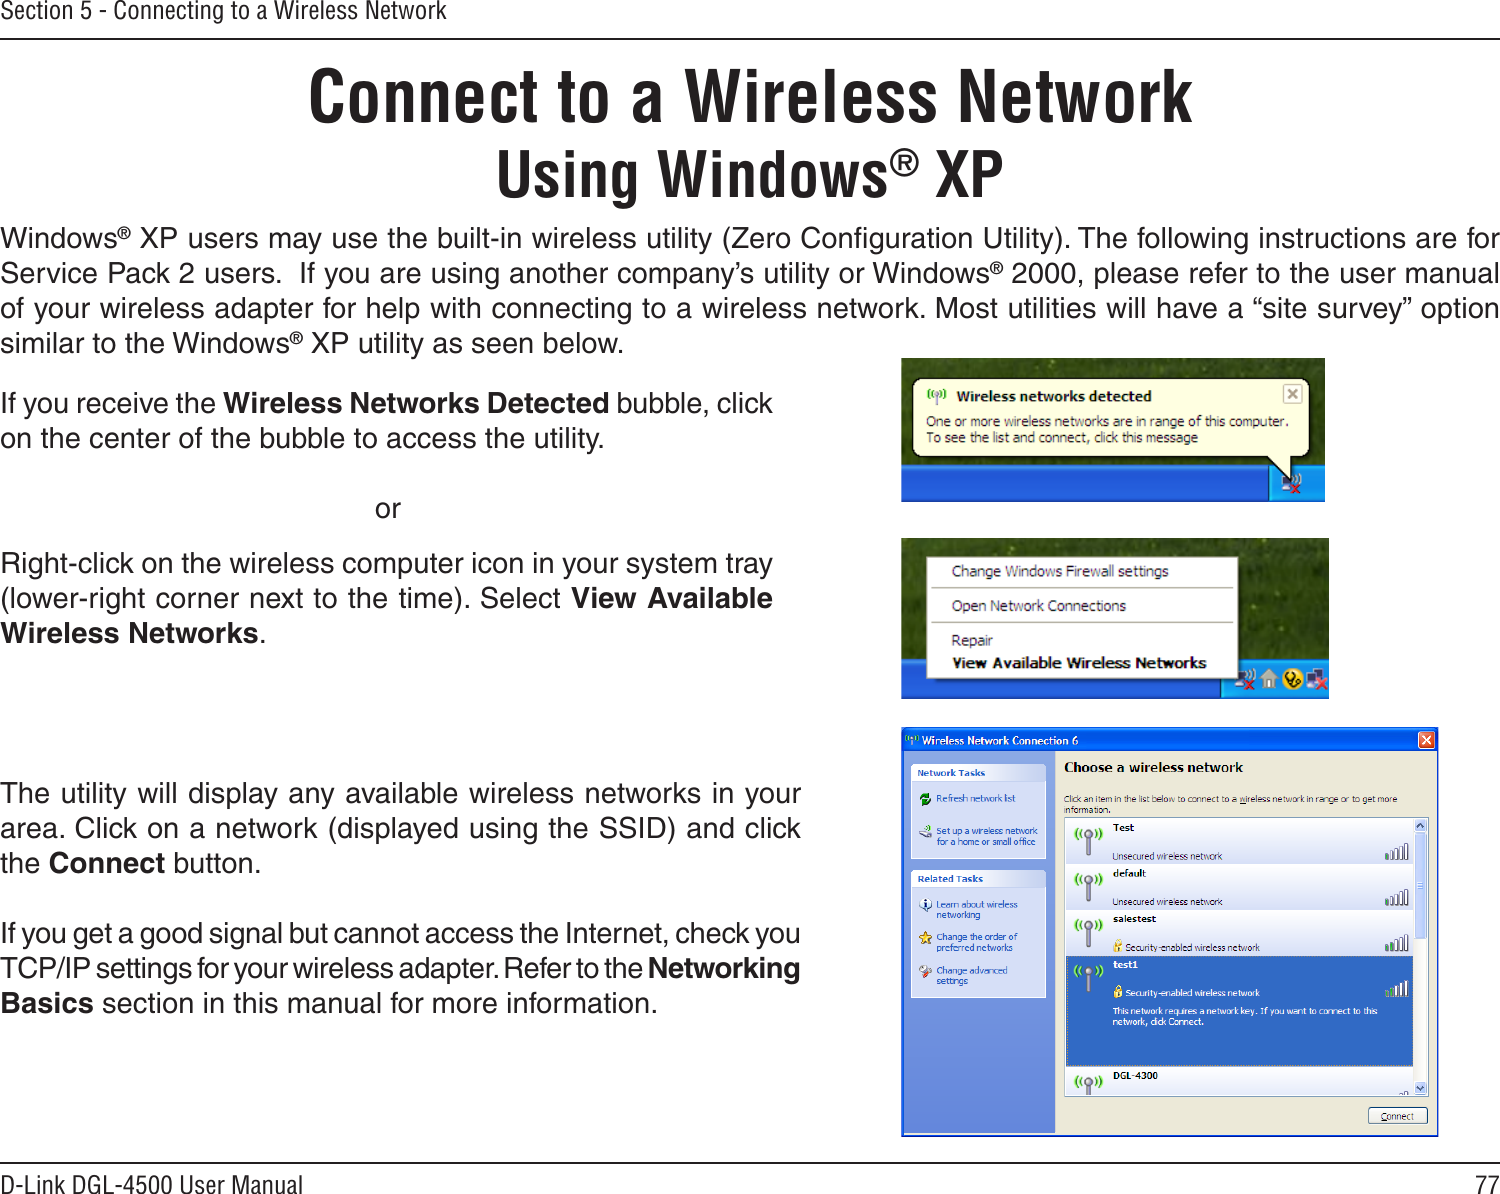 77D-Link DGL-4500 User ManualSection 5 - Connecting to a Wireless NetworkConnect to a Wireless NetworkUsing Windows® XPWindows® XP users may use the built-in wireless utility (Zero Conﬁguration Utility). The following instructions are for Service Pack 2 users.  If you are using another company’s utility or Windows® 2000, please refer to the user manual of your wireless adapter for help with connecting to a wireless network. Most utilities will have a “site survey” option similar to the Windows® XP utility as seen below.Right-click on the wireless computer icon in your system tray (lower-right corner next to the time). Select View Available Wireless Networks.If you receive the Wireless Networks Detected bubble, click on the center of the bubble to access the utility.     orThe utility will display any available wireless networks in your area. Click on a network (displayed using the SSID) and click the Connect button.If you get a good signal but cannot access the Internet, check you TCP/IP settings for your wireless adapter. Refer to the Networking Basics section in this manual for more information.